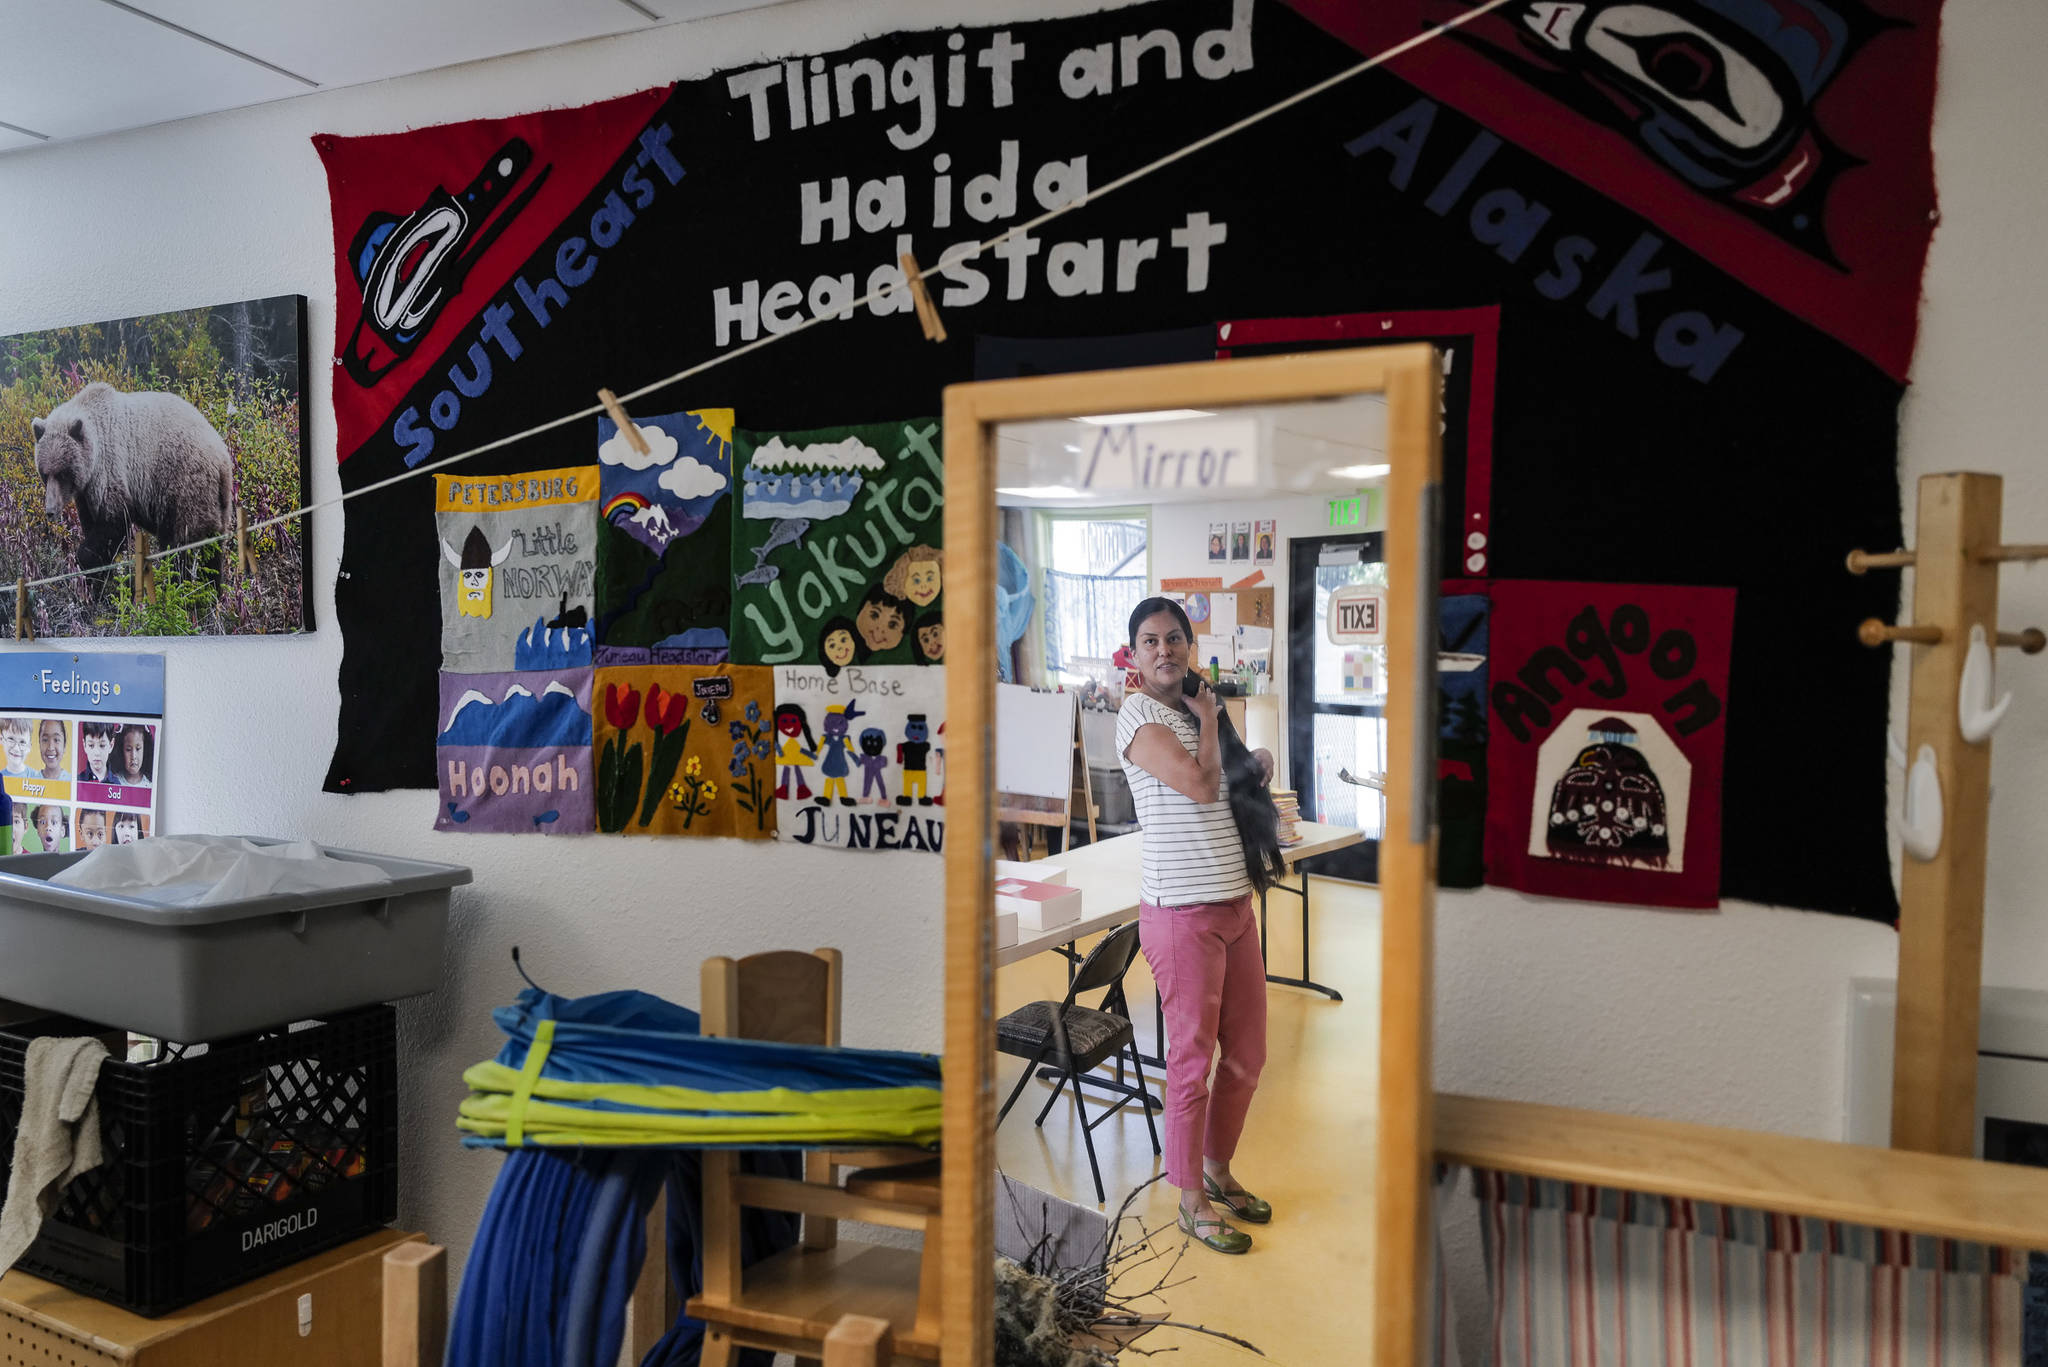 Amber Frommherz, Director for the Tlingit and Haida’s Head Start program, talks about funding for the program at one of two classrooms at their Airport Shopping Center location on Tuesday, July 30, 2019. (Michael Penn | Juneau Empire)